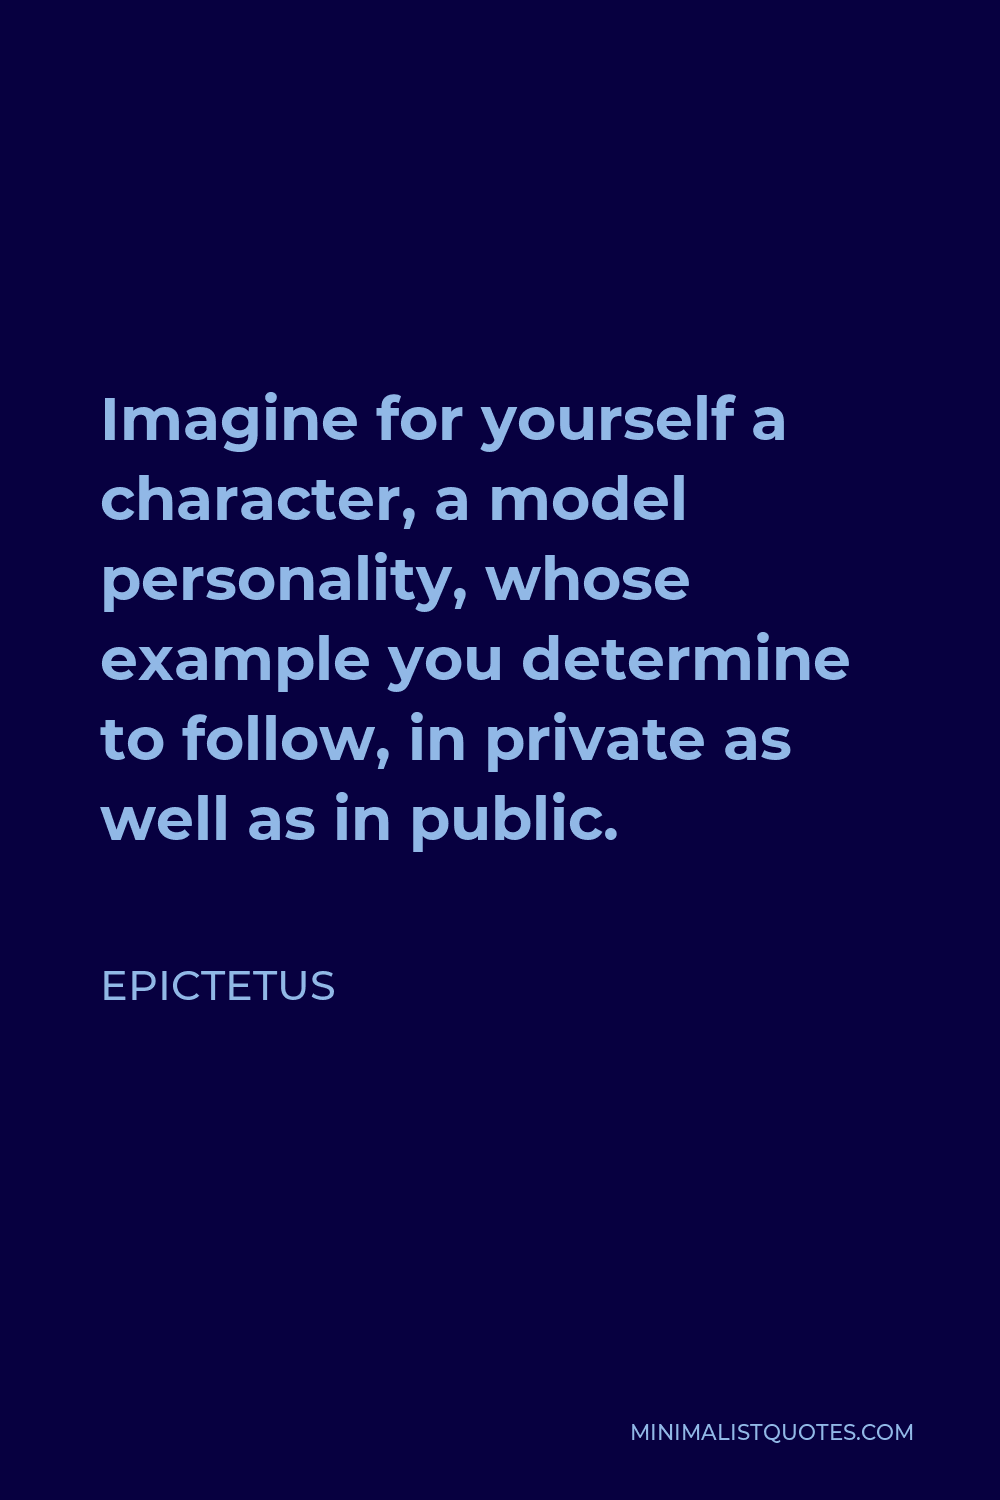 Epictetus Quote - Imagine for yourself a character, a model personality, whose example you determine to follow, in private as well as in public.